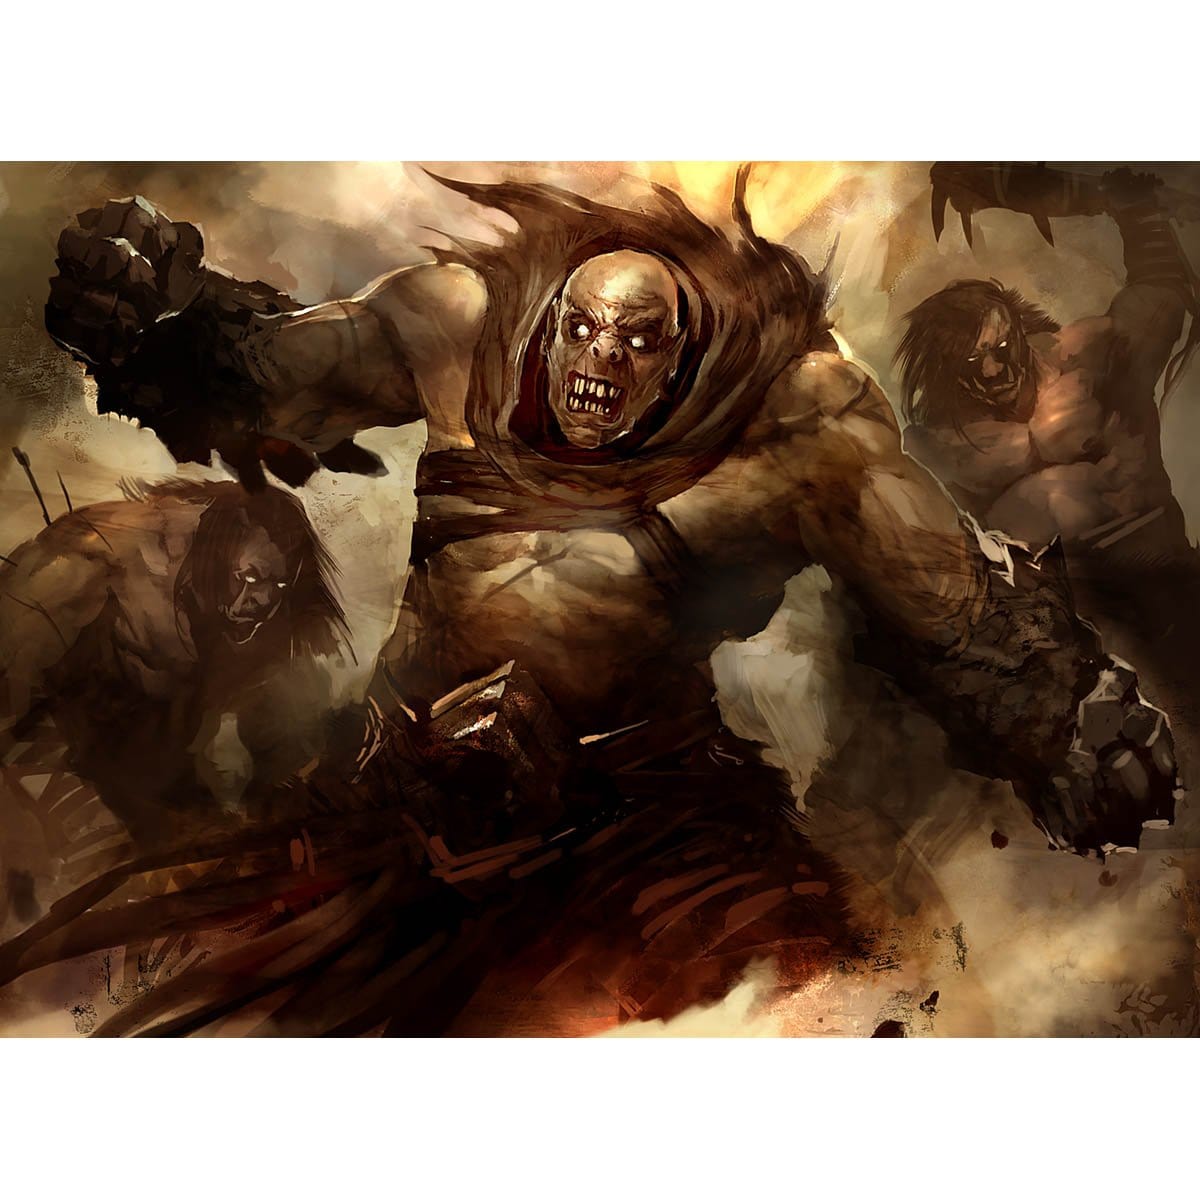 Shatterskull Giant Print - Print - Original Magic Art - Accessories for Magic the Gathering and other card games